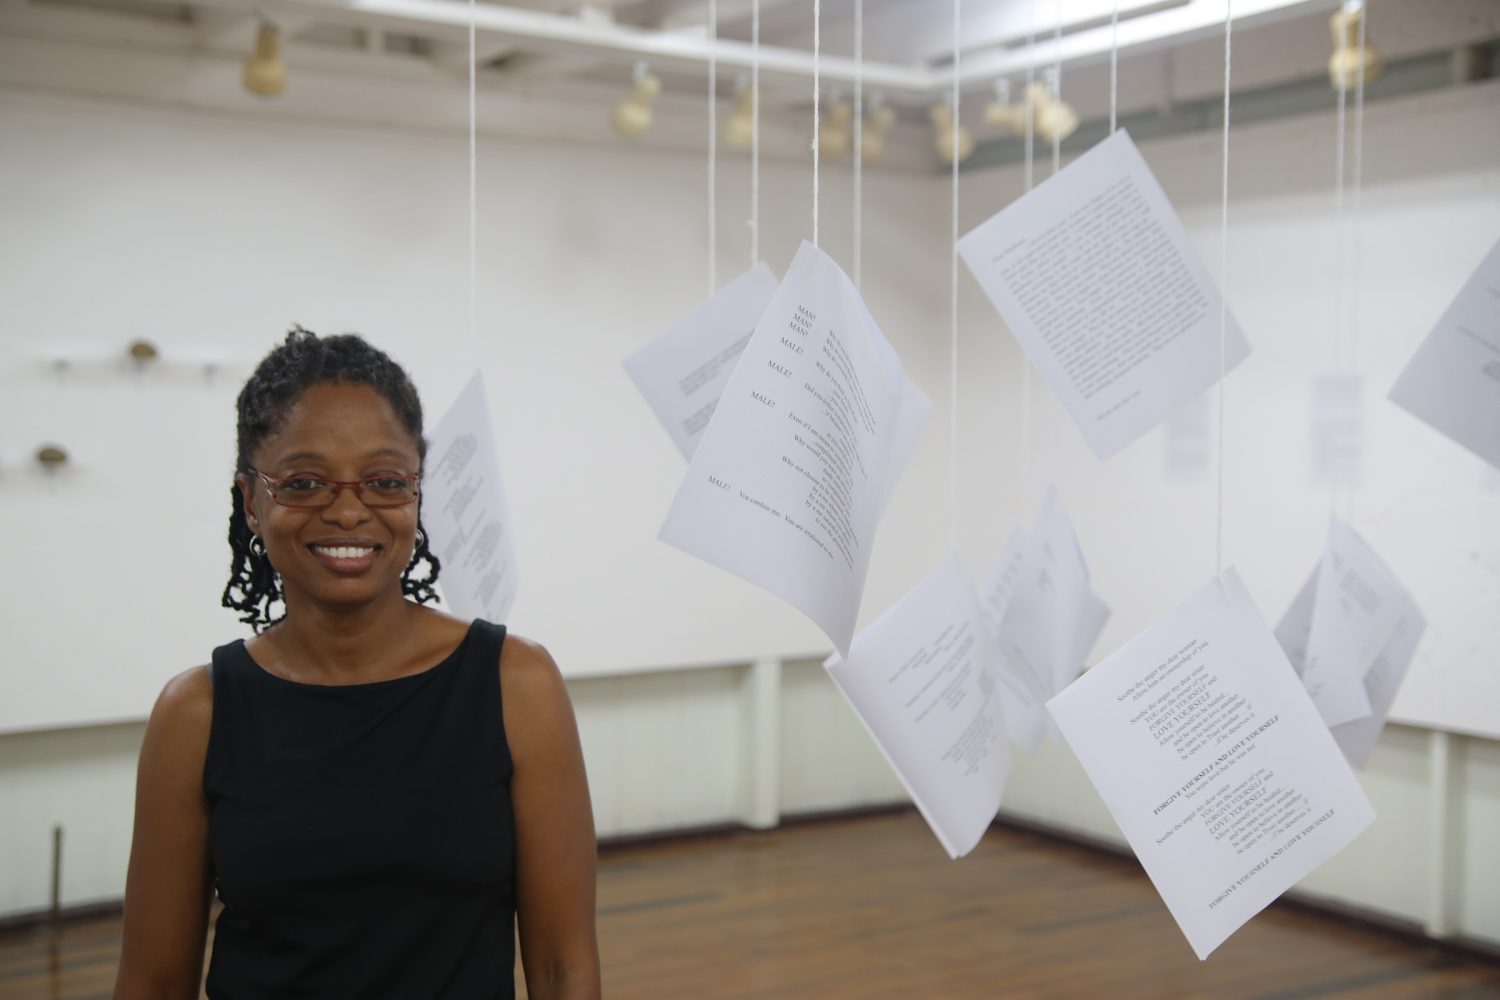 Artist Akima McPherson stands among the suspended text that form part of her exhibition.